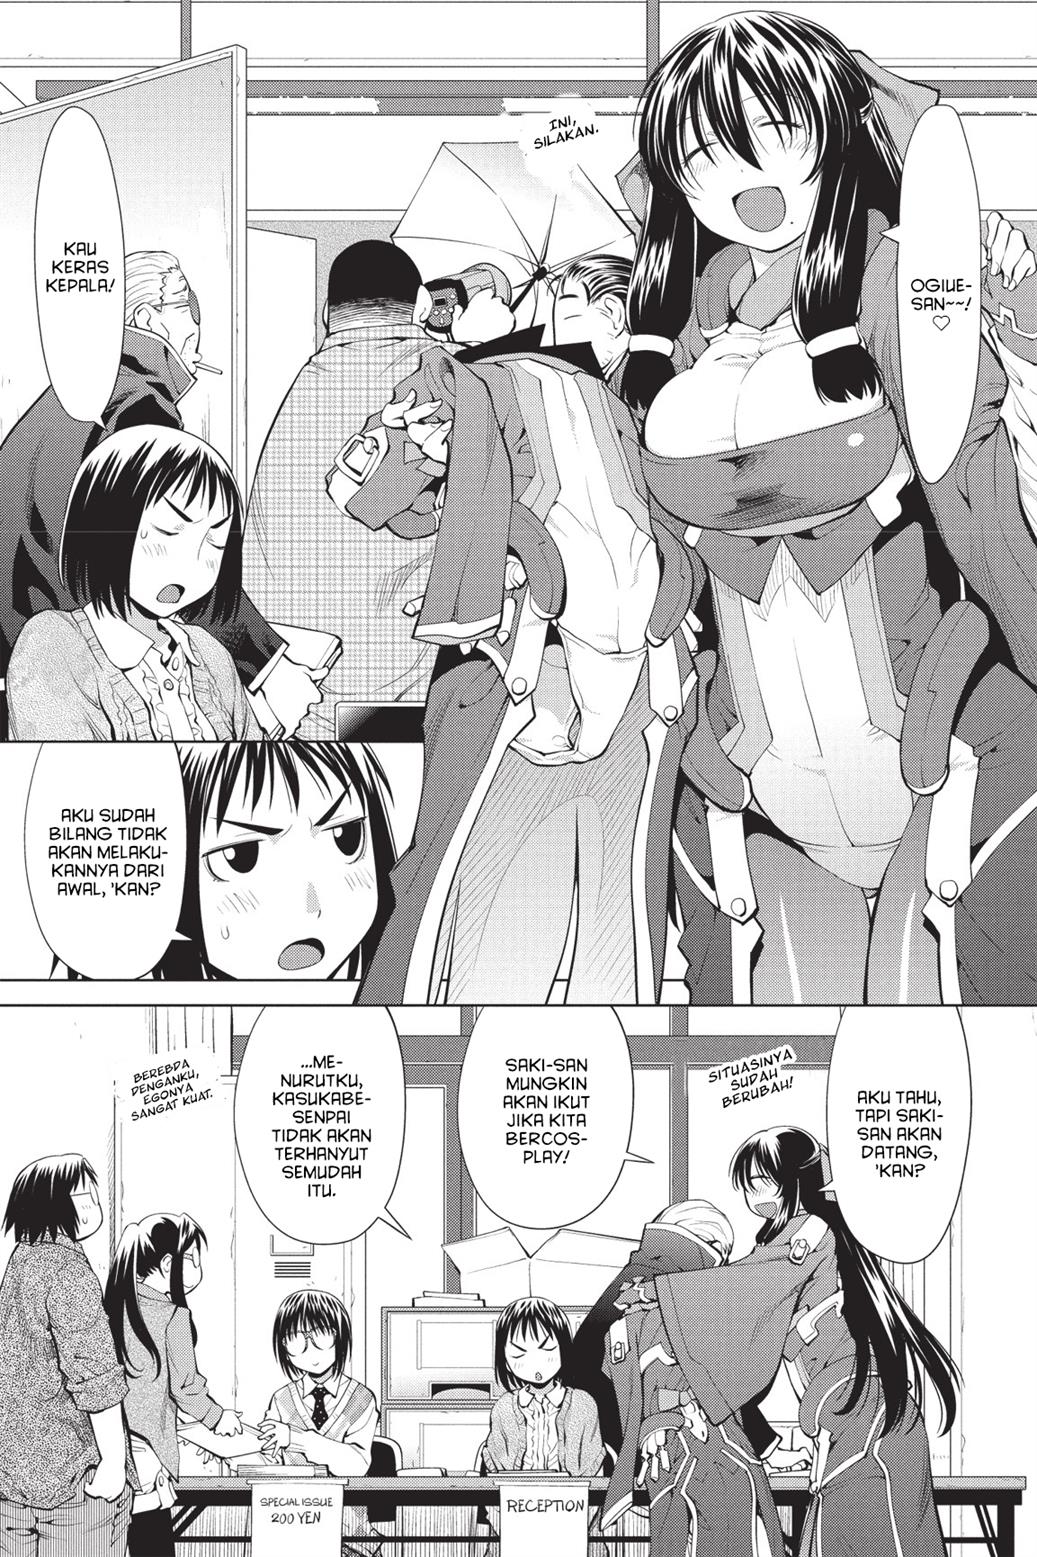 Genshiken – The Society for the Study of Modern Visual Culture Chapter 75 Image 2